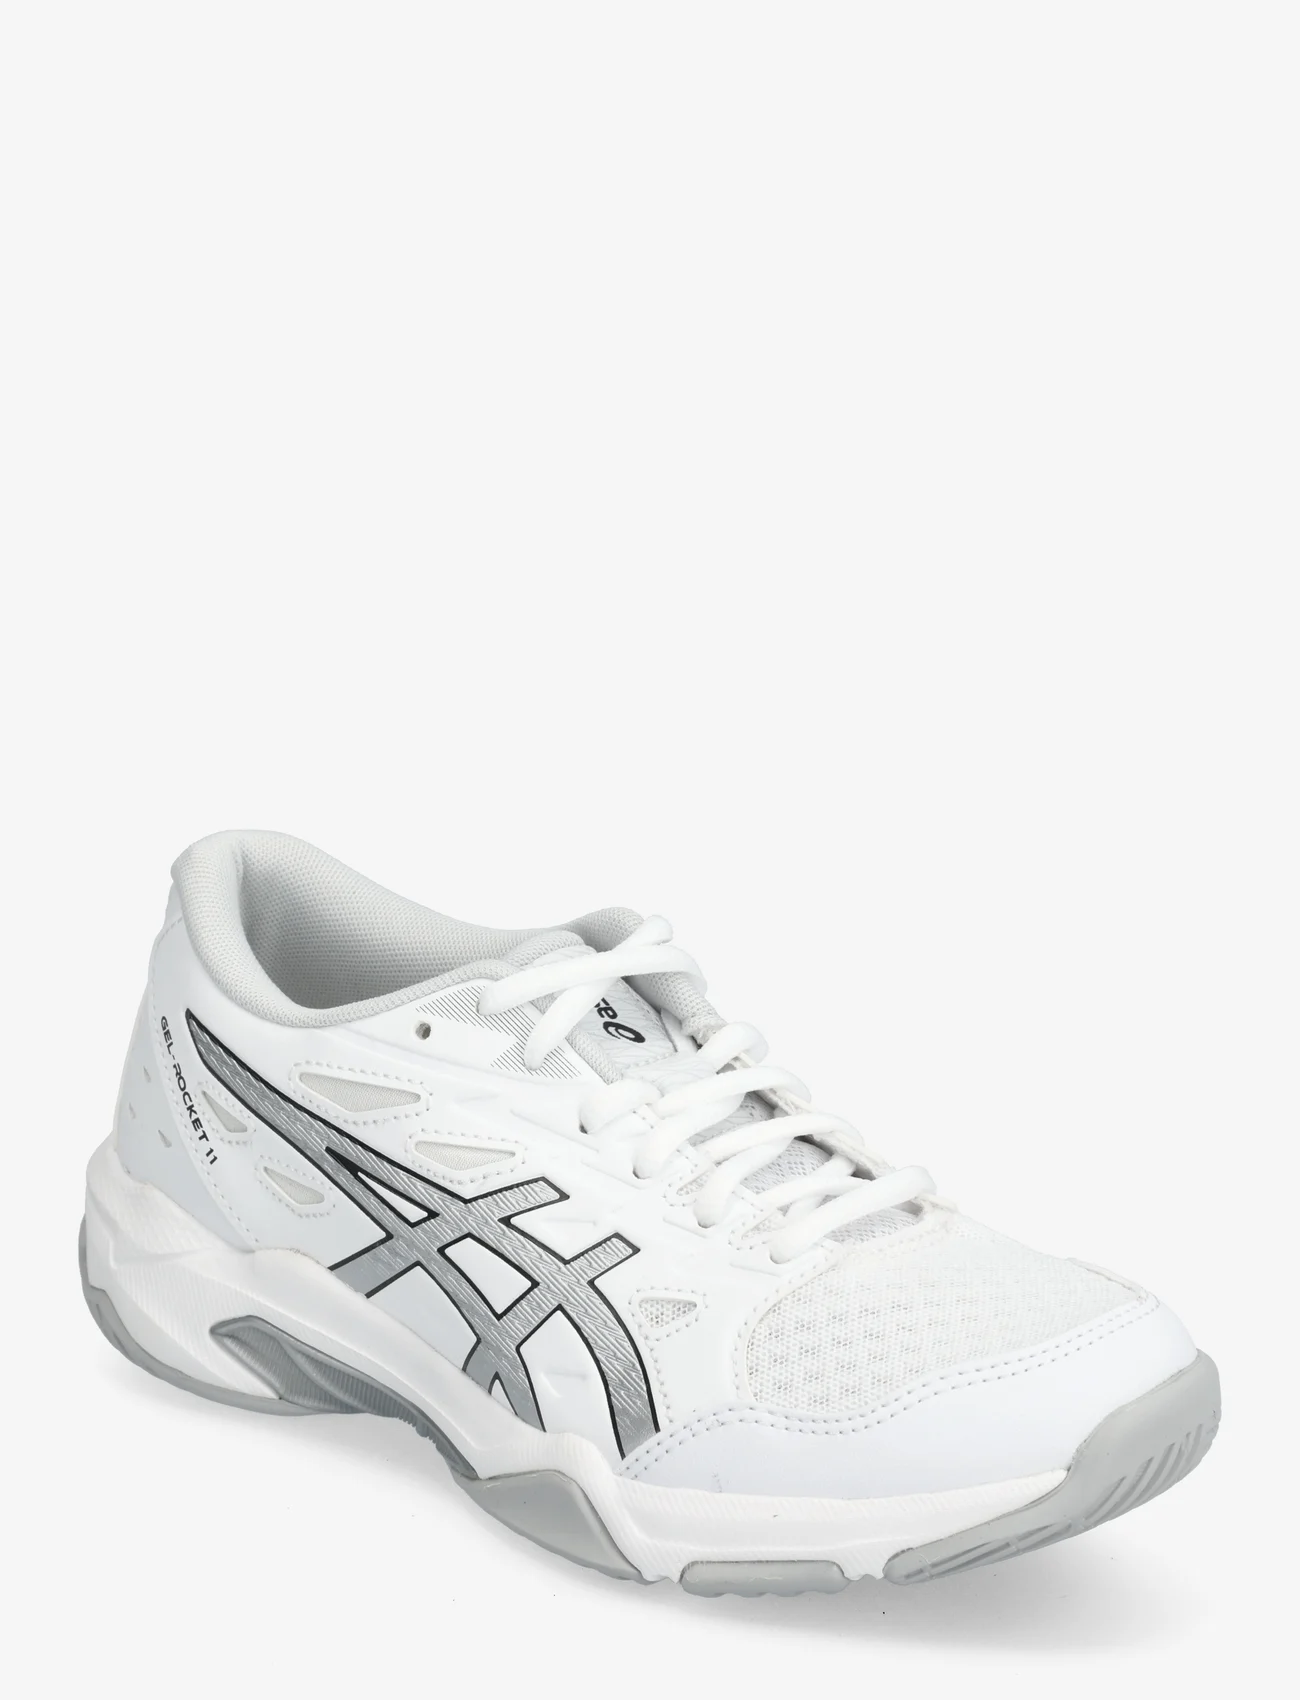 Asics - GEL-ROCKET 11 - low top sneakers - white/pure silver - 0